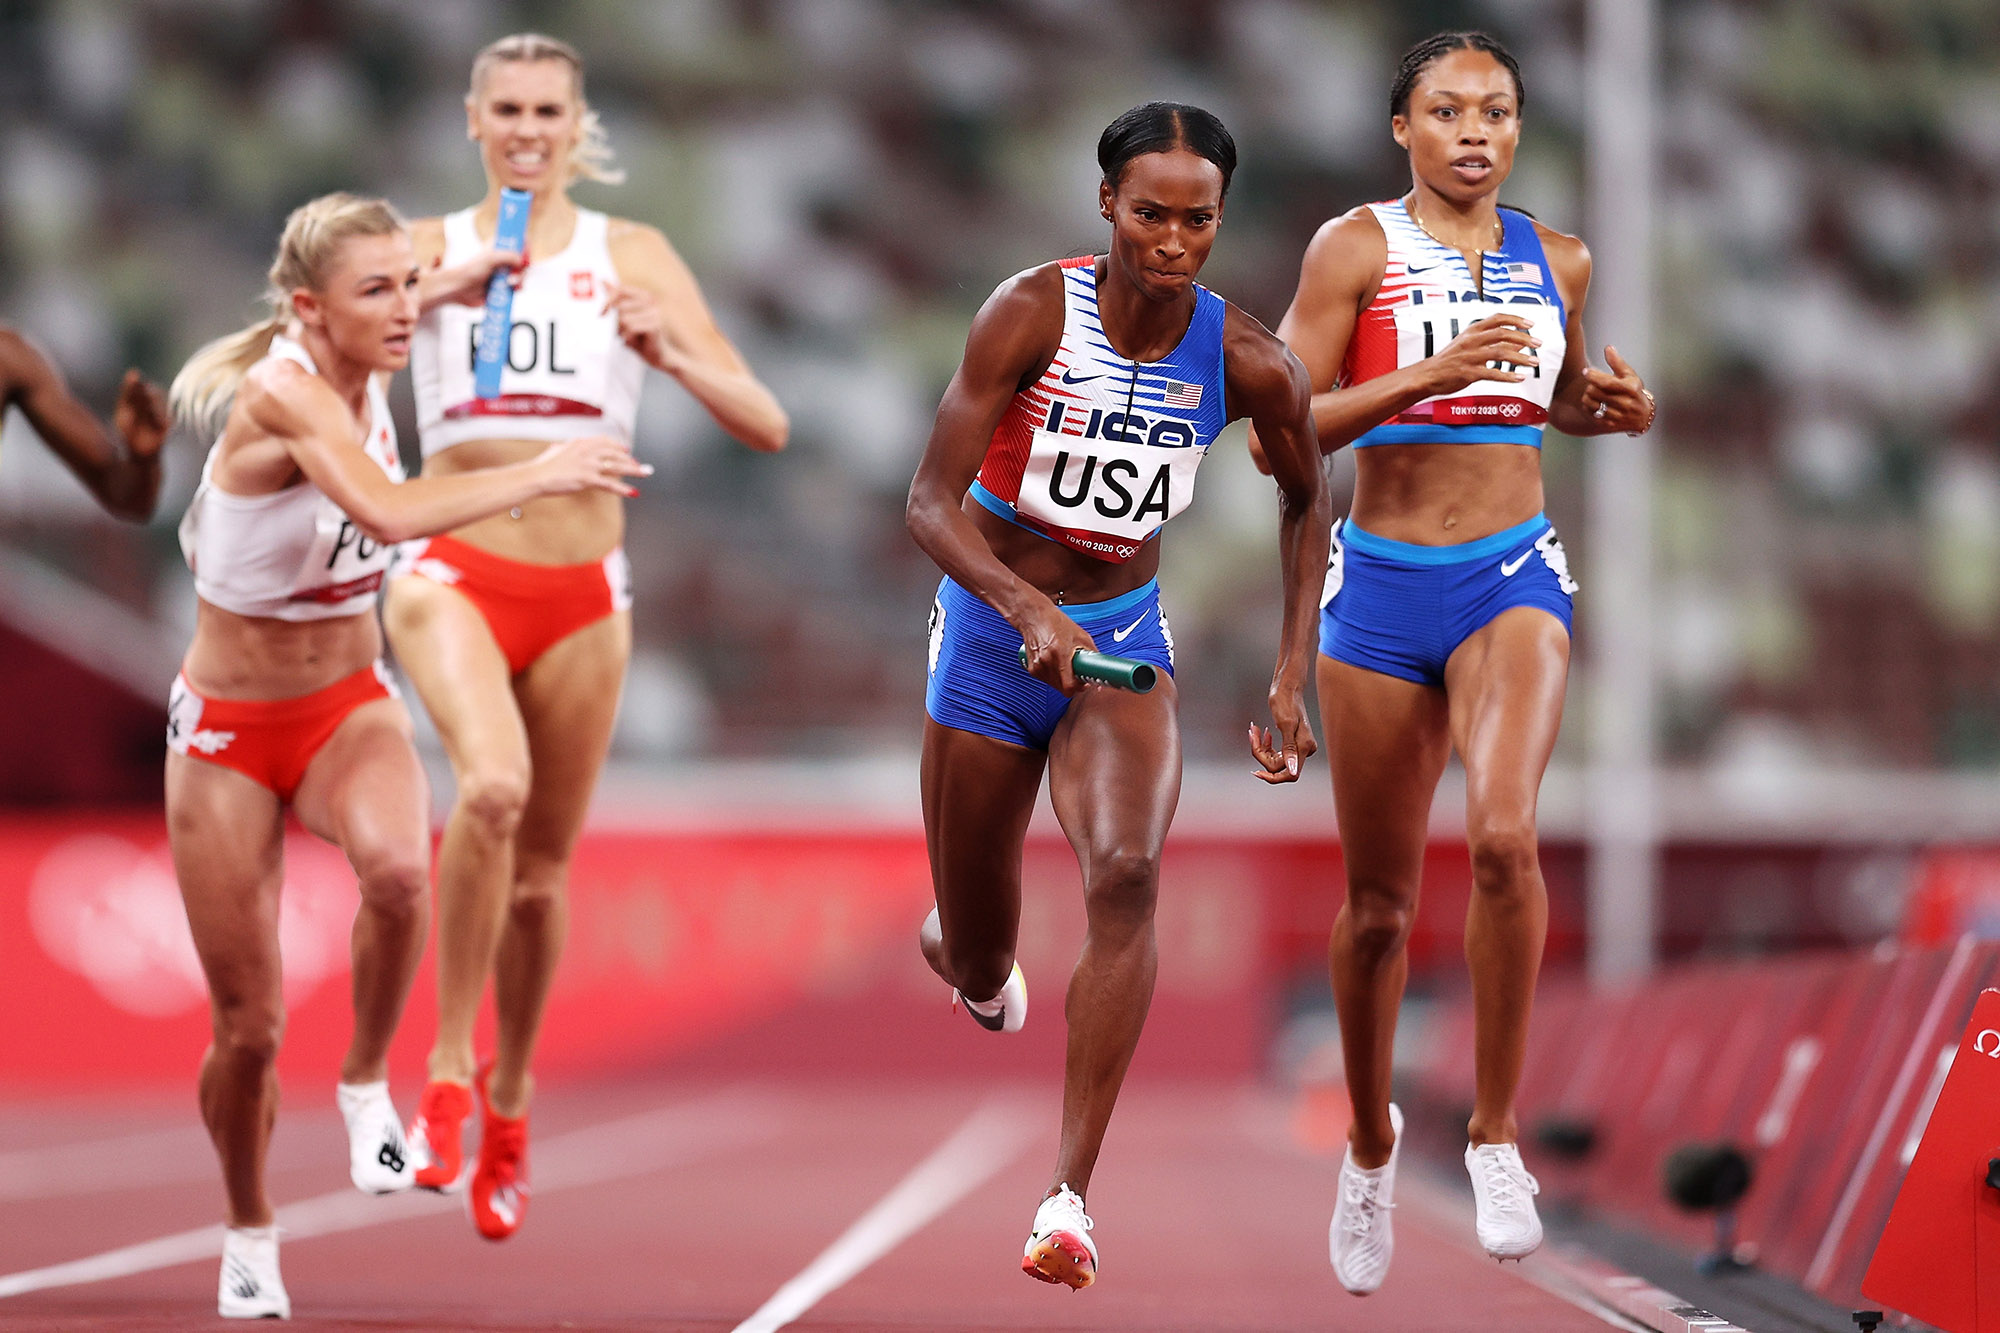 Allyson Felix Becomes the Most Decorated U.S. Olympic Track Athlete Ever